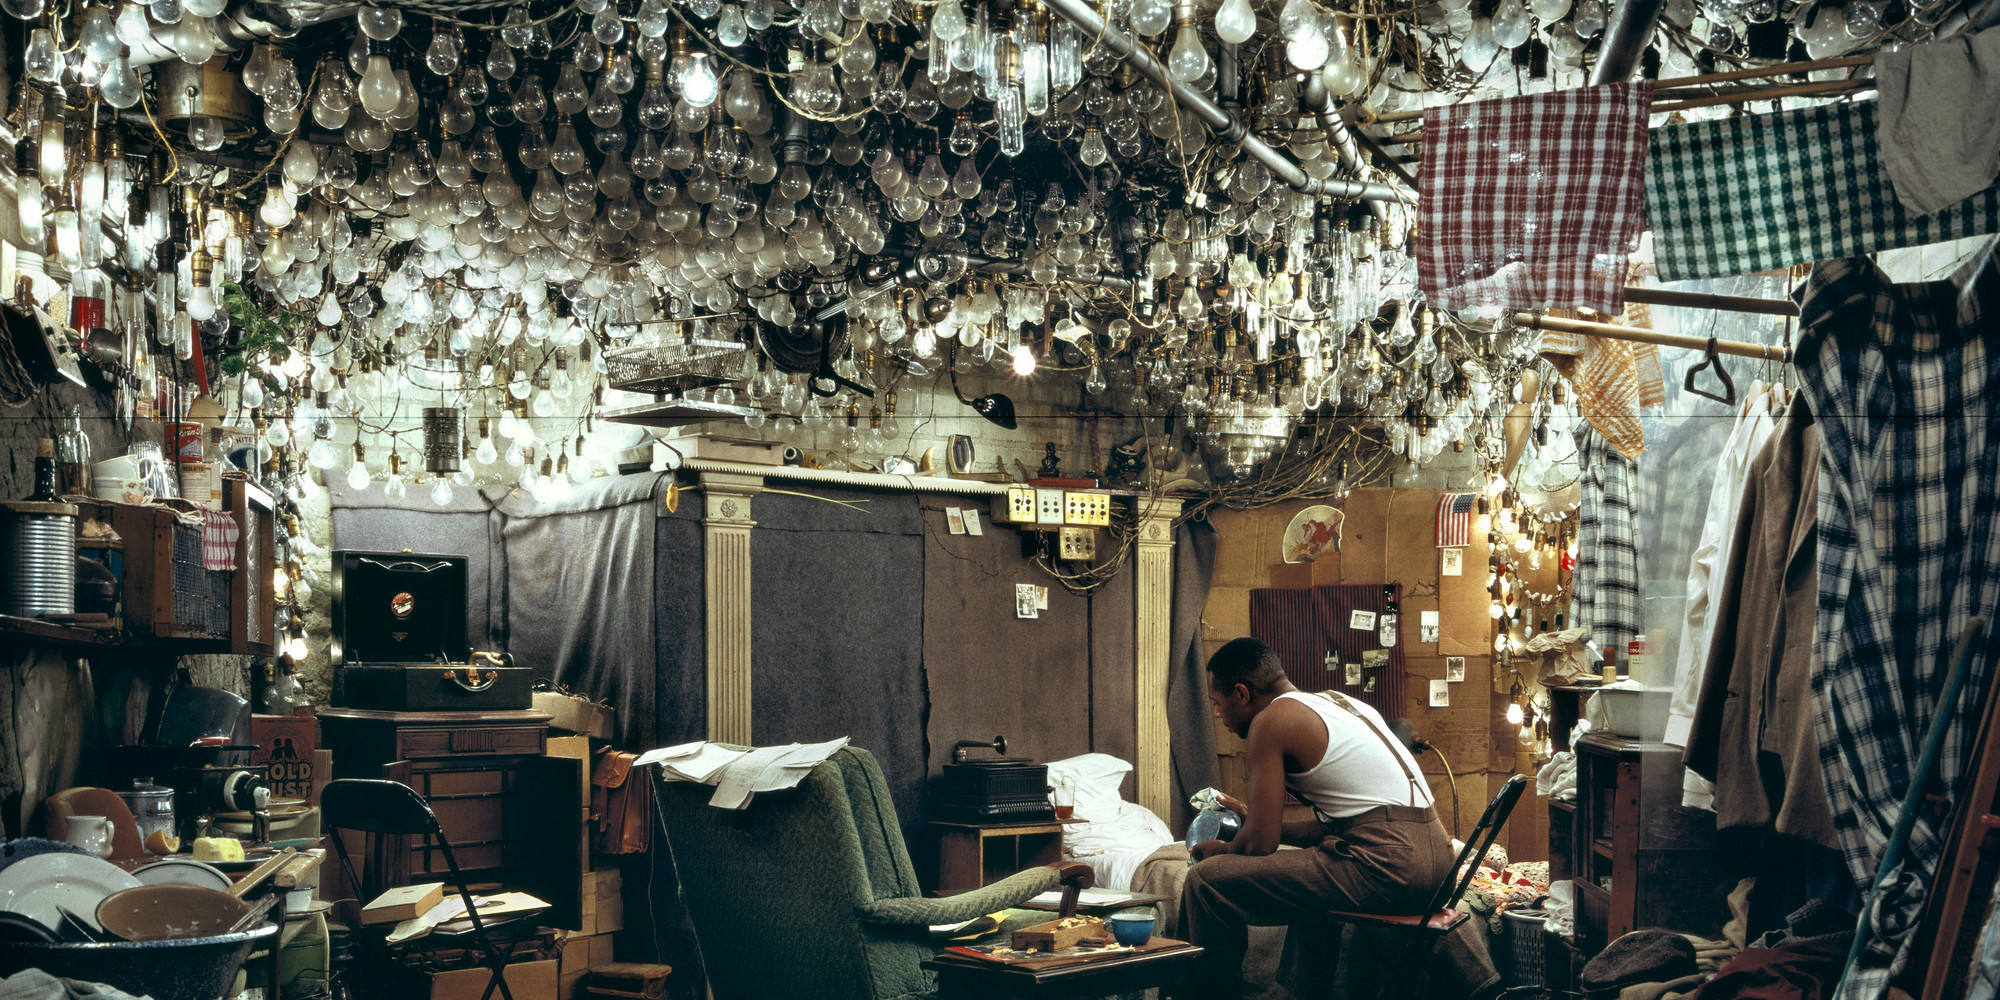 Jeff Wall. After “Invisible Man” by Ralph Ellison, the Prologue. 1999–2000. Silver dye bleach transparency; aluminum light box: 5 ft. 8 1/2 in. × 8 ft. 2 3/4 in. (174 × 250.8 cm). The Museum of Modern Art, New York. The Photography Council Fund, Horace W. Goldsmith Fund through Robert B. Menschel, and acquired through the generosity of Jo Carole and Ronald S. Lauder and Carol and David Appel. © 2022 Jeff Wall